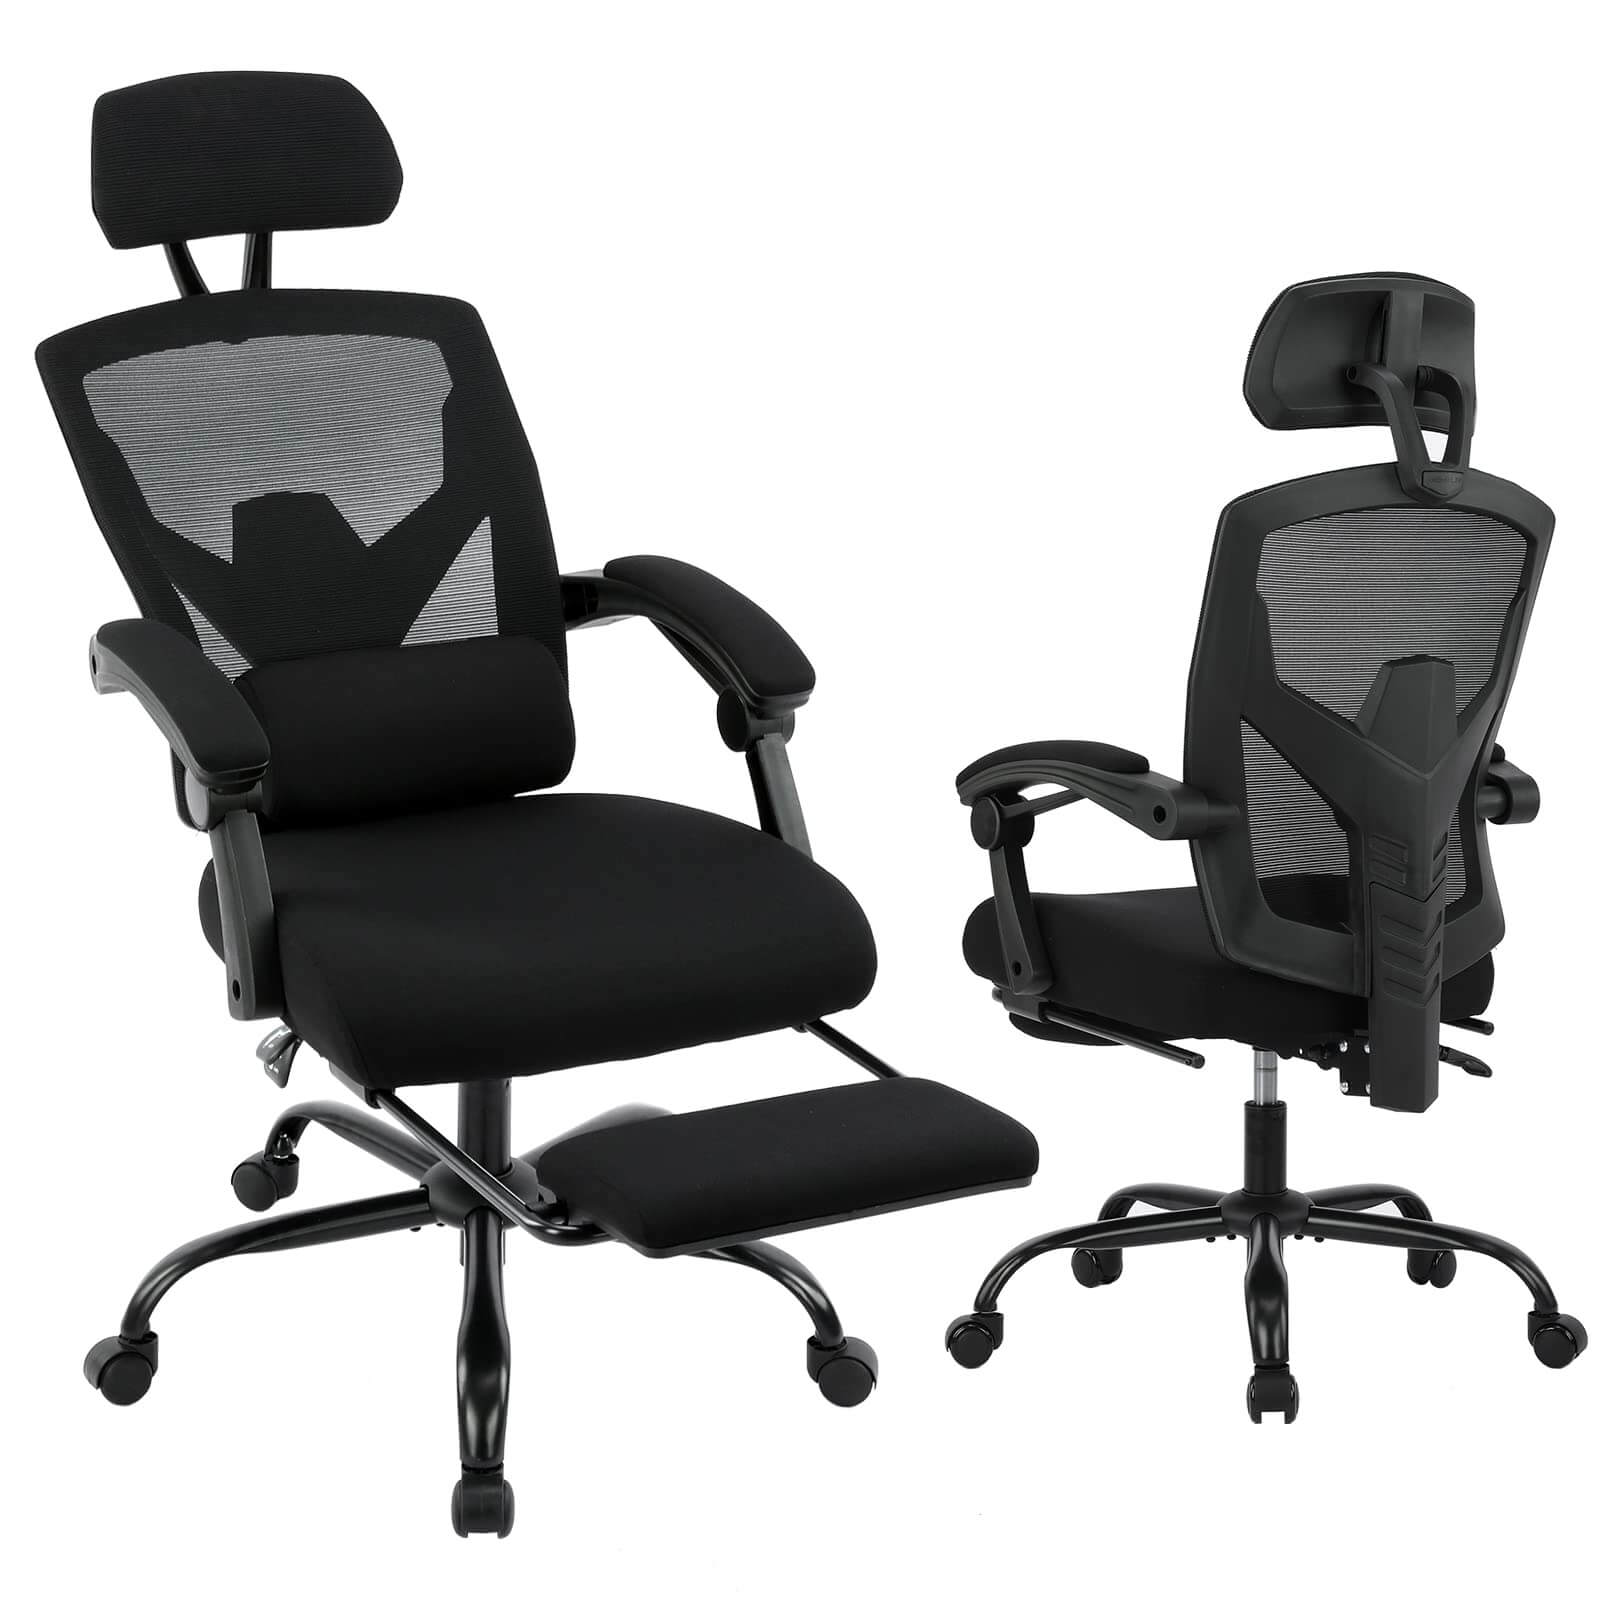 Where Should Lumbar Support Be on an Office Chair?